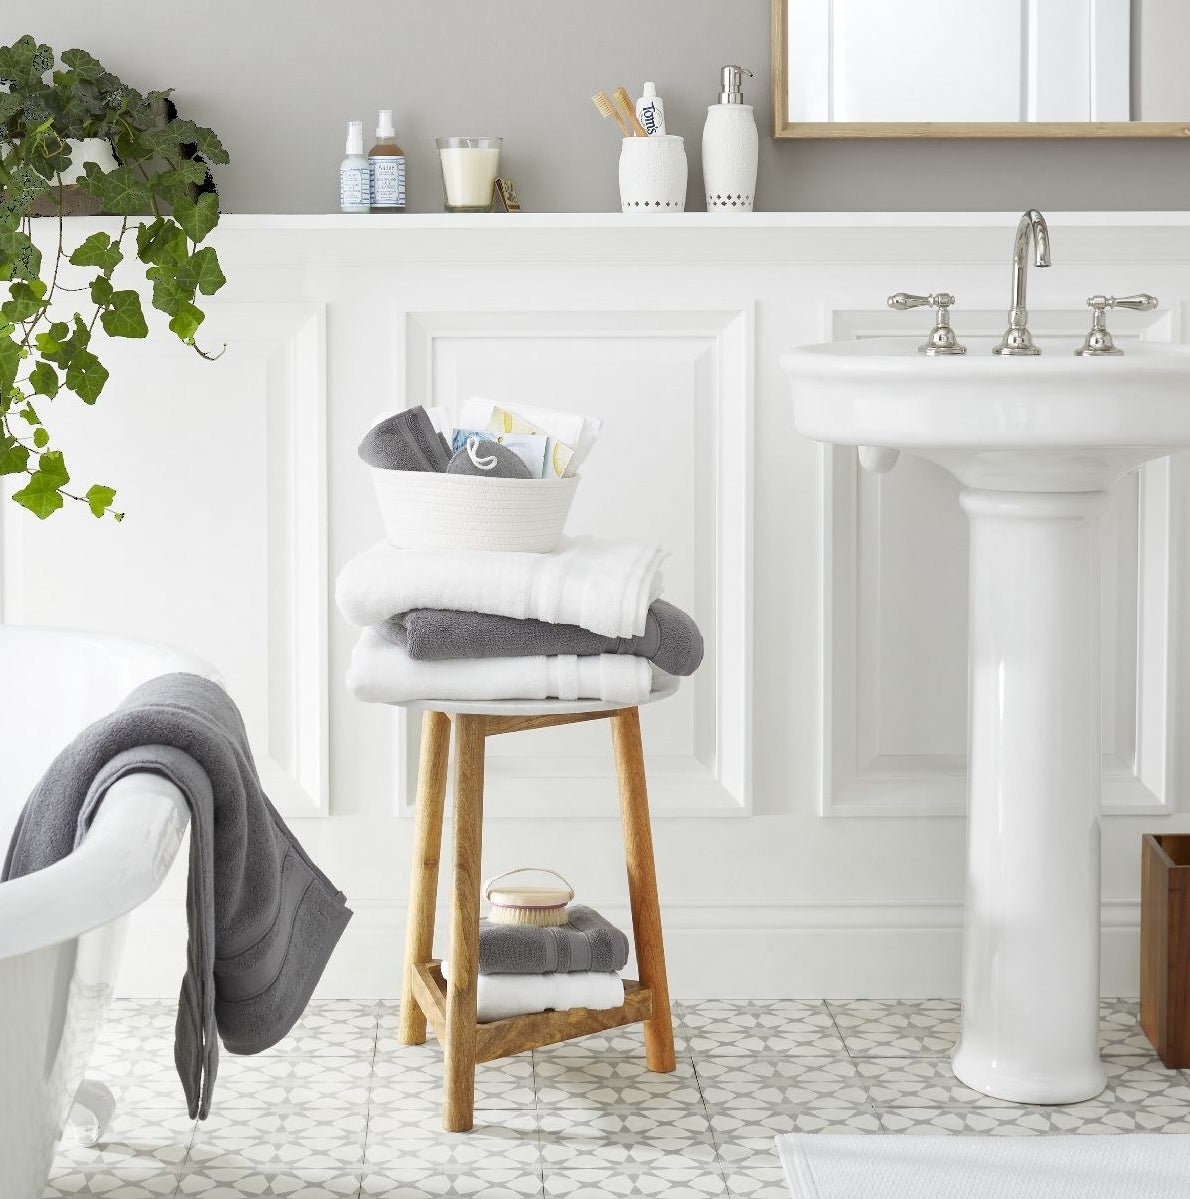 Wood and marble side table with gray and white towels stacked on top